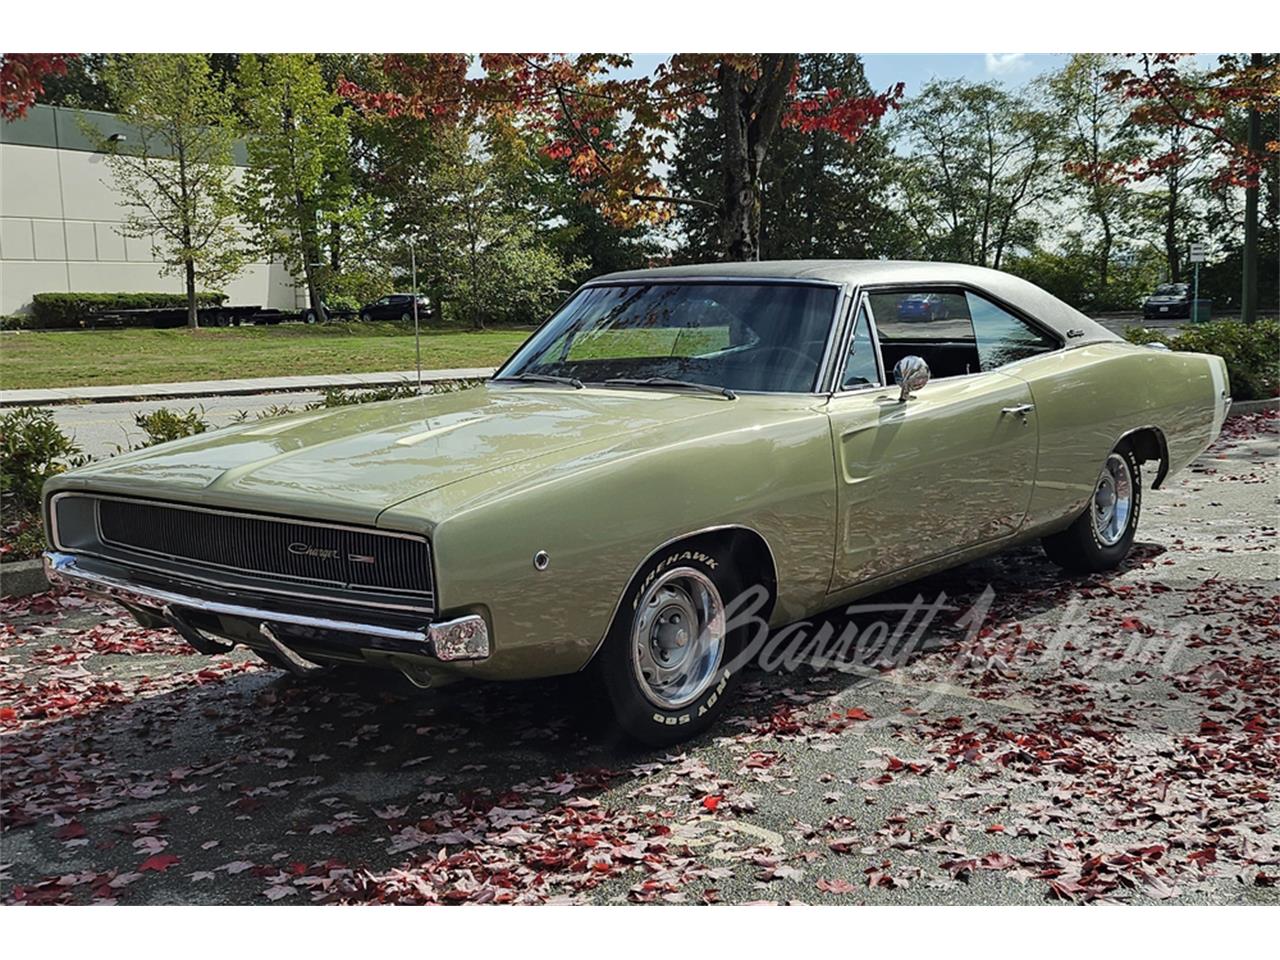 For Sale at Auction: 1968 Dodge Charger in Scottsdale, Arizona for sale in Scottsdale, AZ